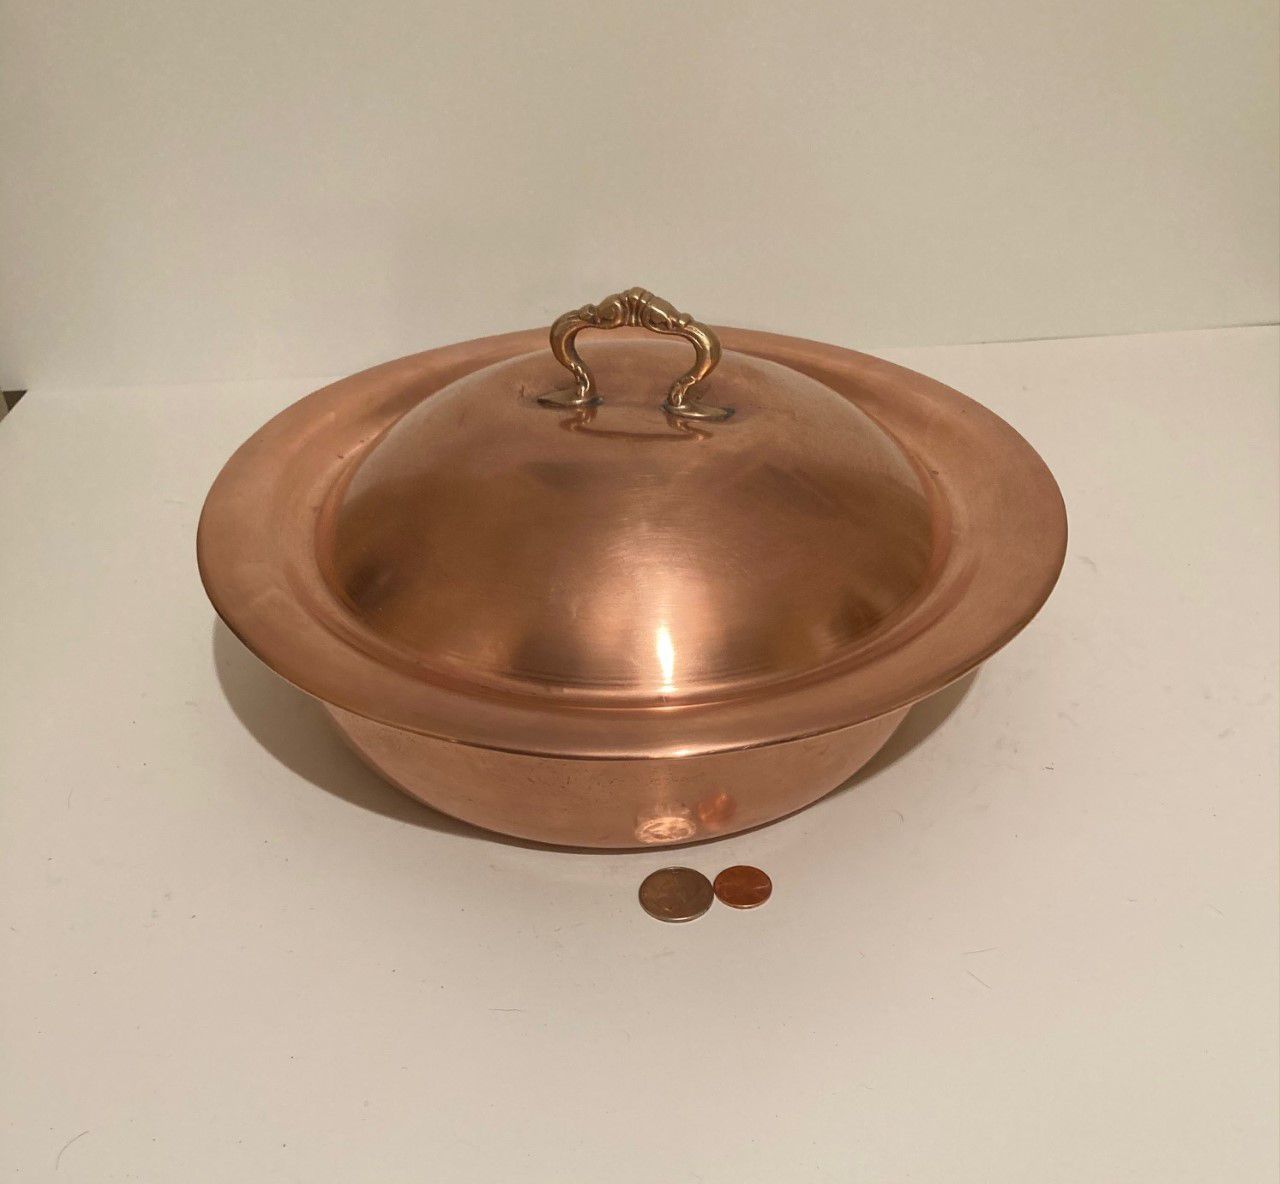 Vintage Metal Copper and Brass Pot & Lid, 11 1/2" x 5", Kitchen Decor, Table Display, Shelf Display, This Can Be Shined Up Even More